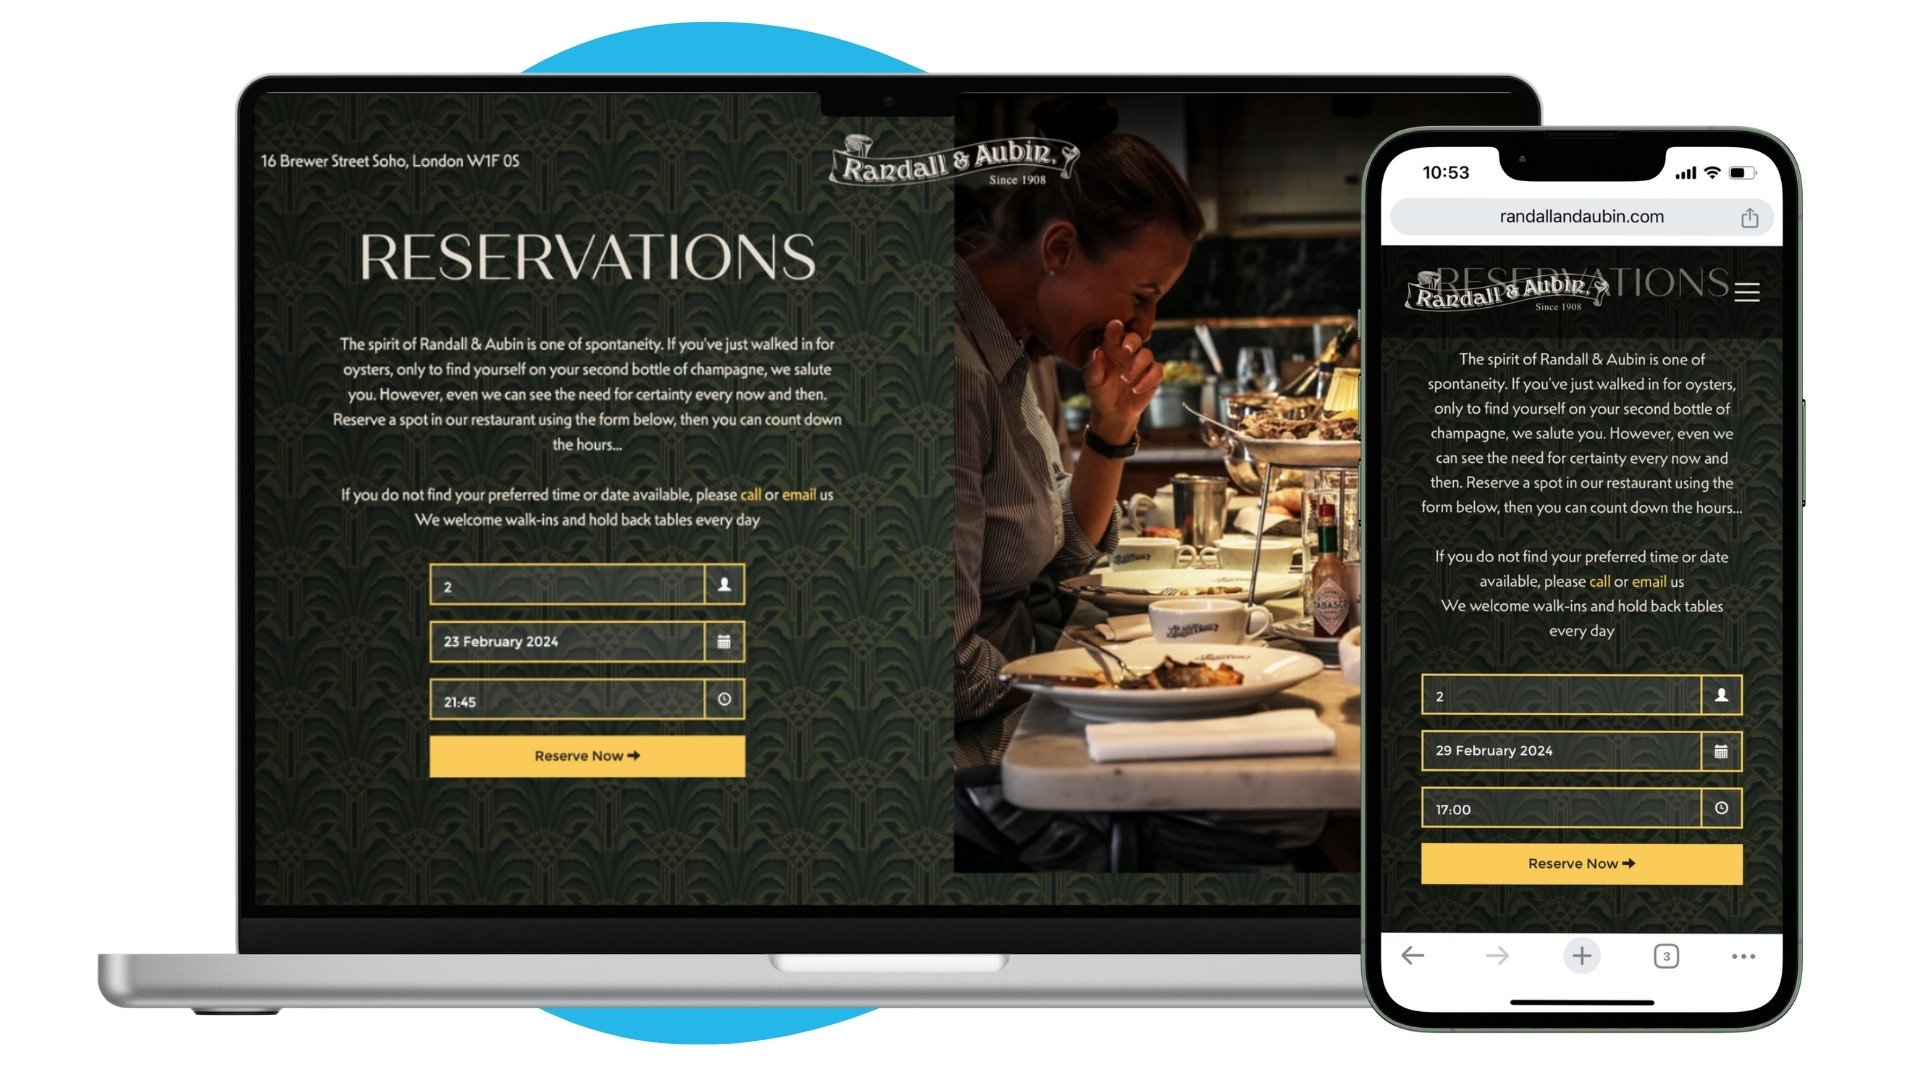 Randall and Aubin London Restaurant Booking Widget Example on Laptop and iPhone